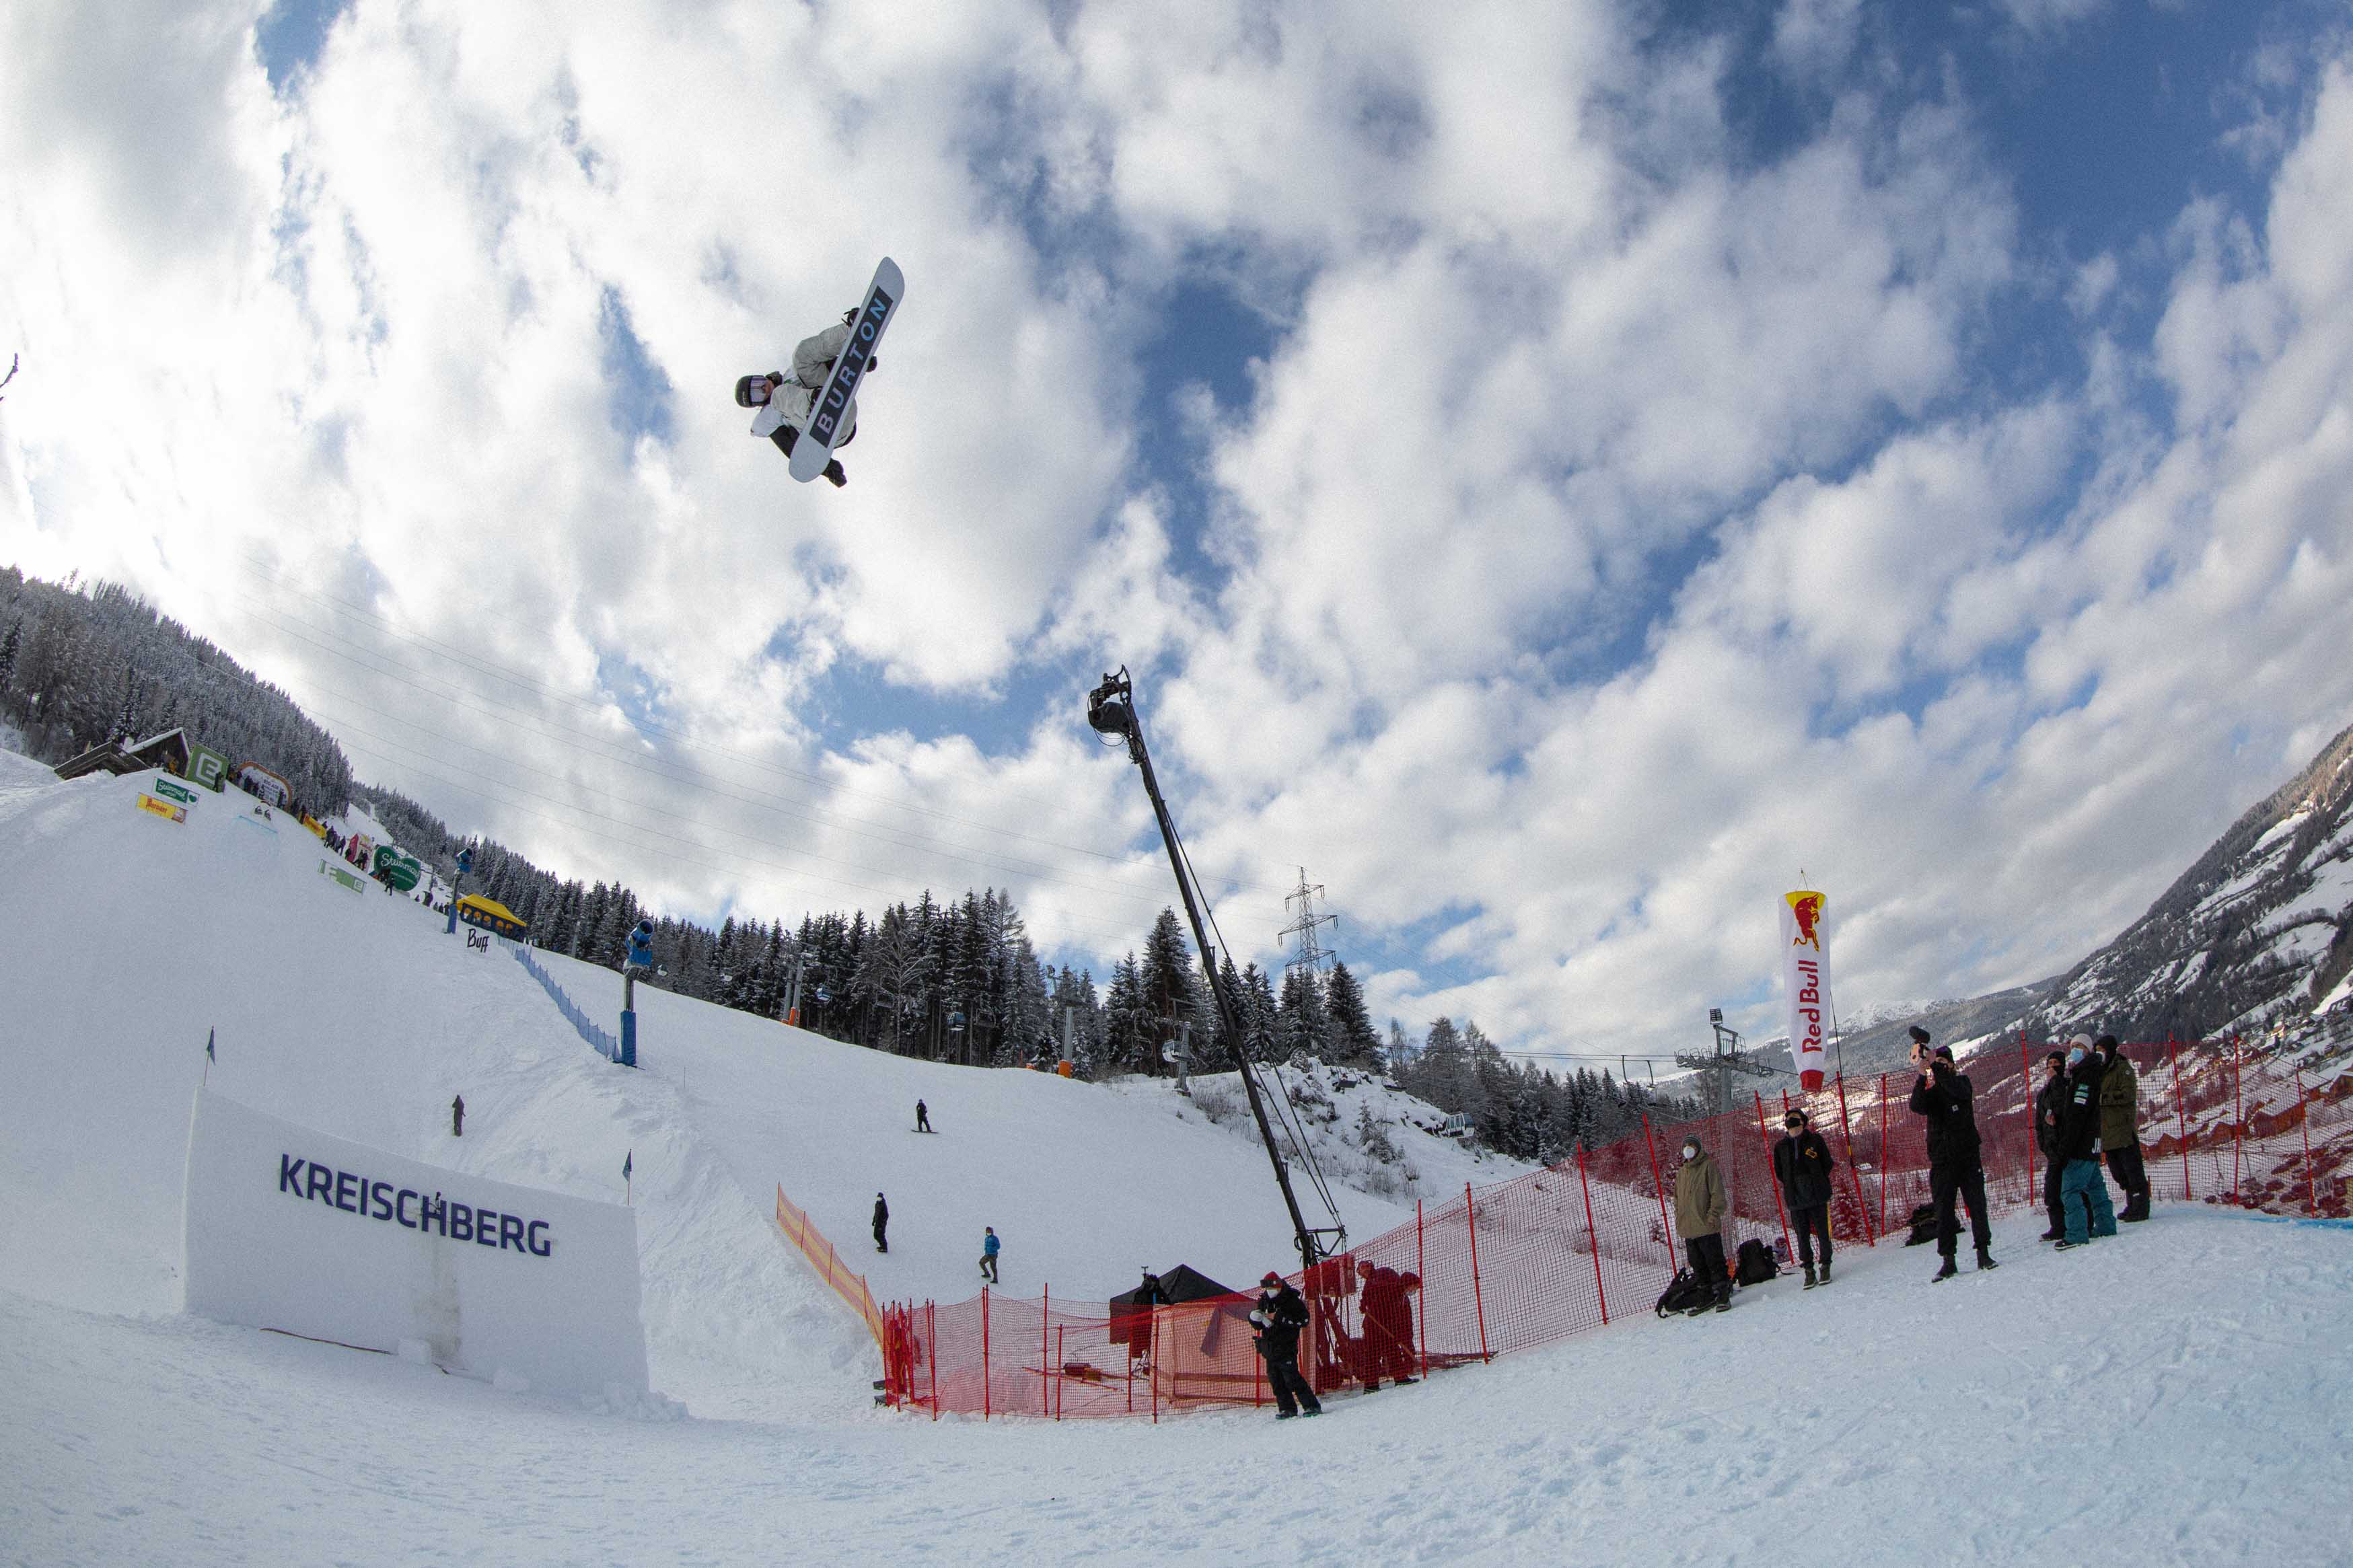 Monster Energy's Zoi Sadowski-Synnott Claims Gold in Snowboard Big Air at the FIS Snowboard Park & Pipe World Cup in Kreischberg, Austria